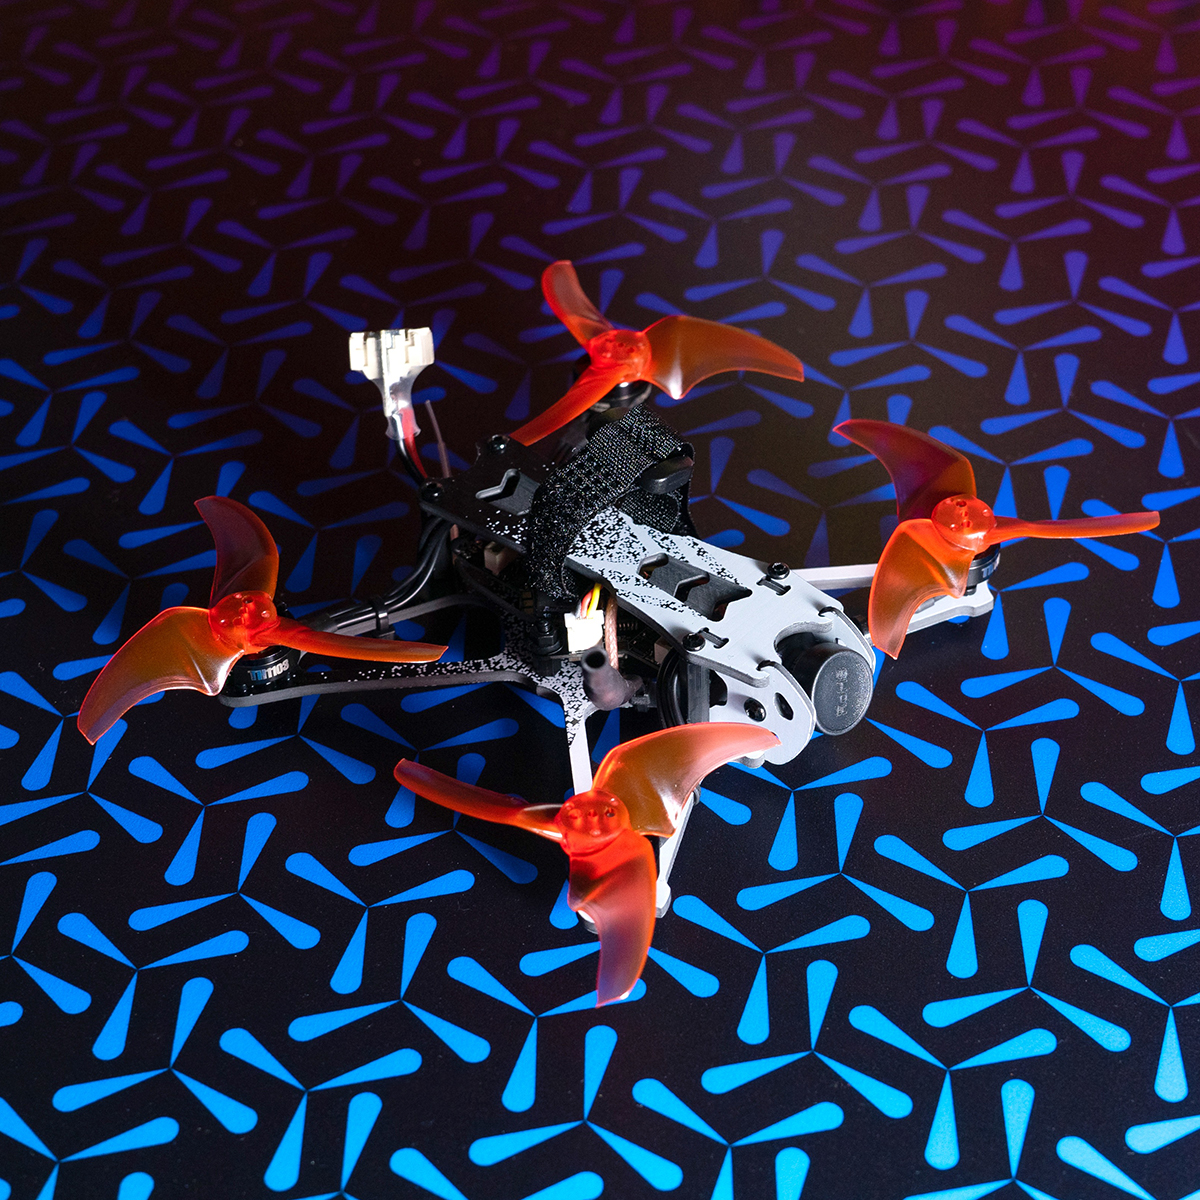 EMAX TinyHawk II Freestyle 2S Micro Brushless FPV Drone